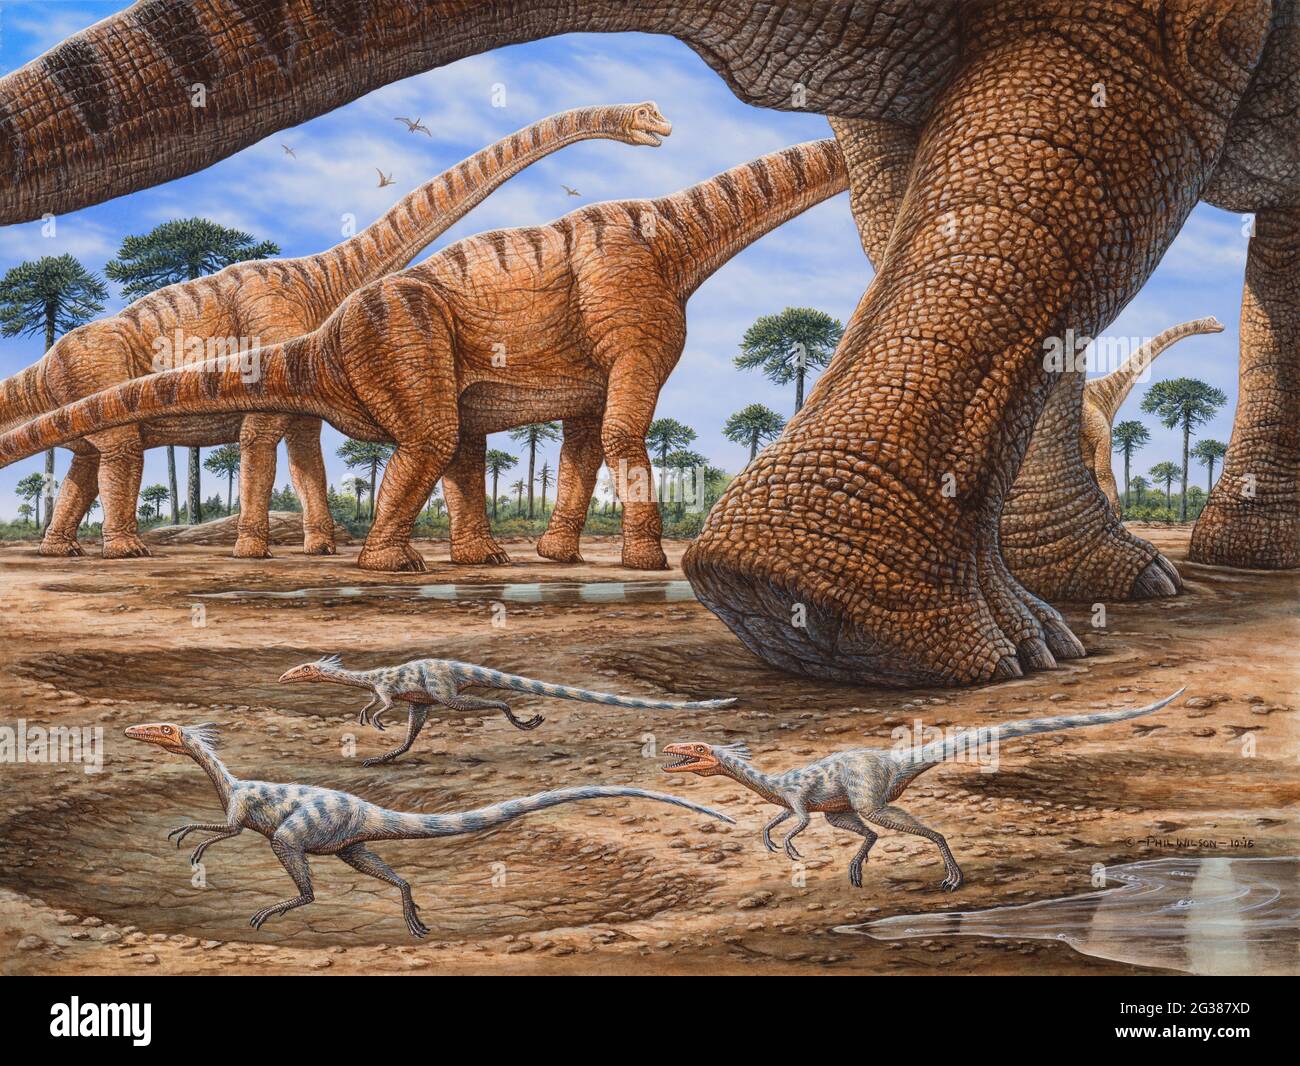 Small Compsognathus dinosaurs try to avoid getting trampled by a passing Brachiosaurus herd. Stock Photo